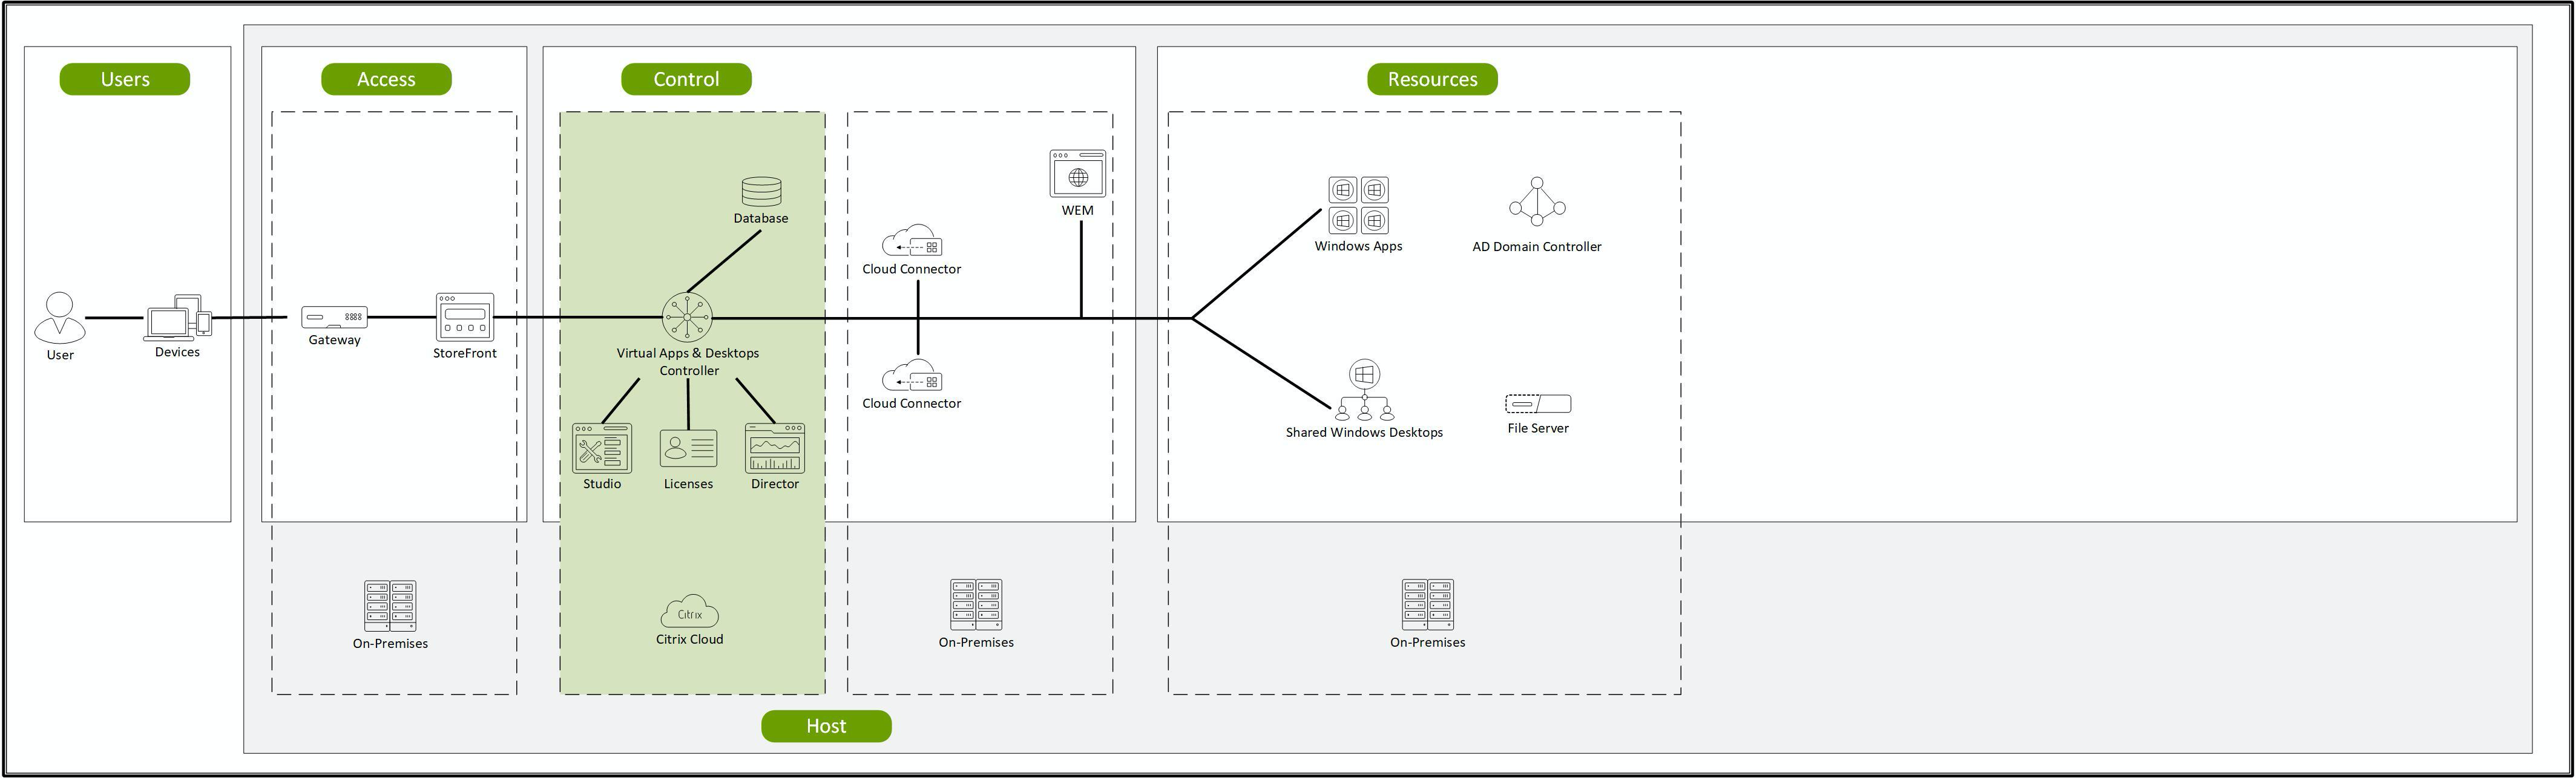 Environment with Citrix Virtual Apps and Desktops service configured